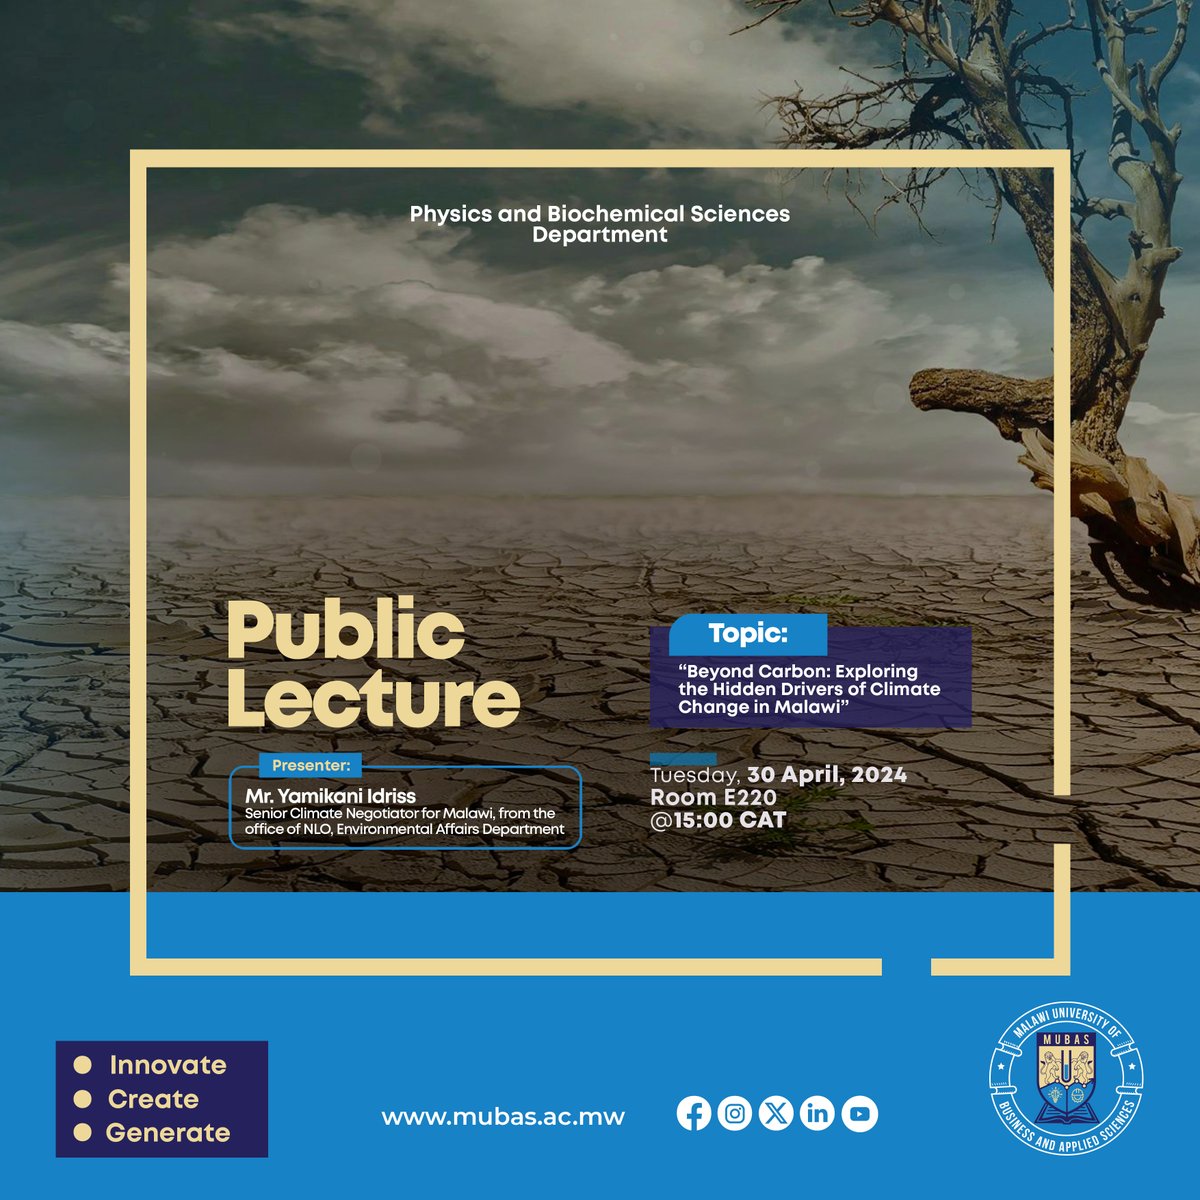 MUBAS is pleased to invite staff, students and the general public to an open lecture on the topic 'Beyond Carbon: Exploring the Hidden Drivers of Climate Change in Malawi' 📅 30 April, 2024 🕒 15:00 CAT 📍 Room E220 #TheHomeOfInnovation #JoinMUBAS #Innovate #Create #Generate